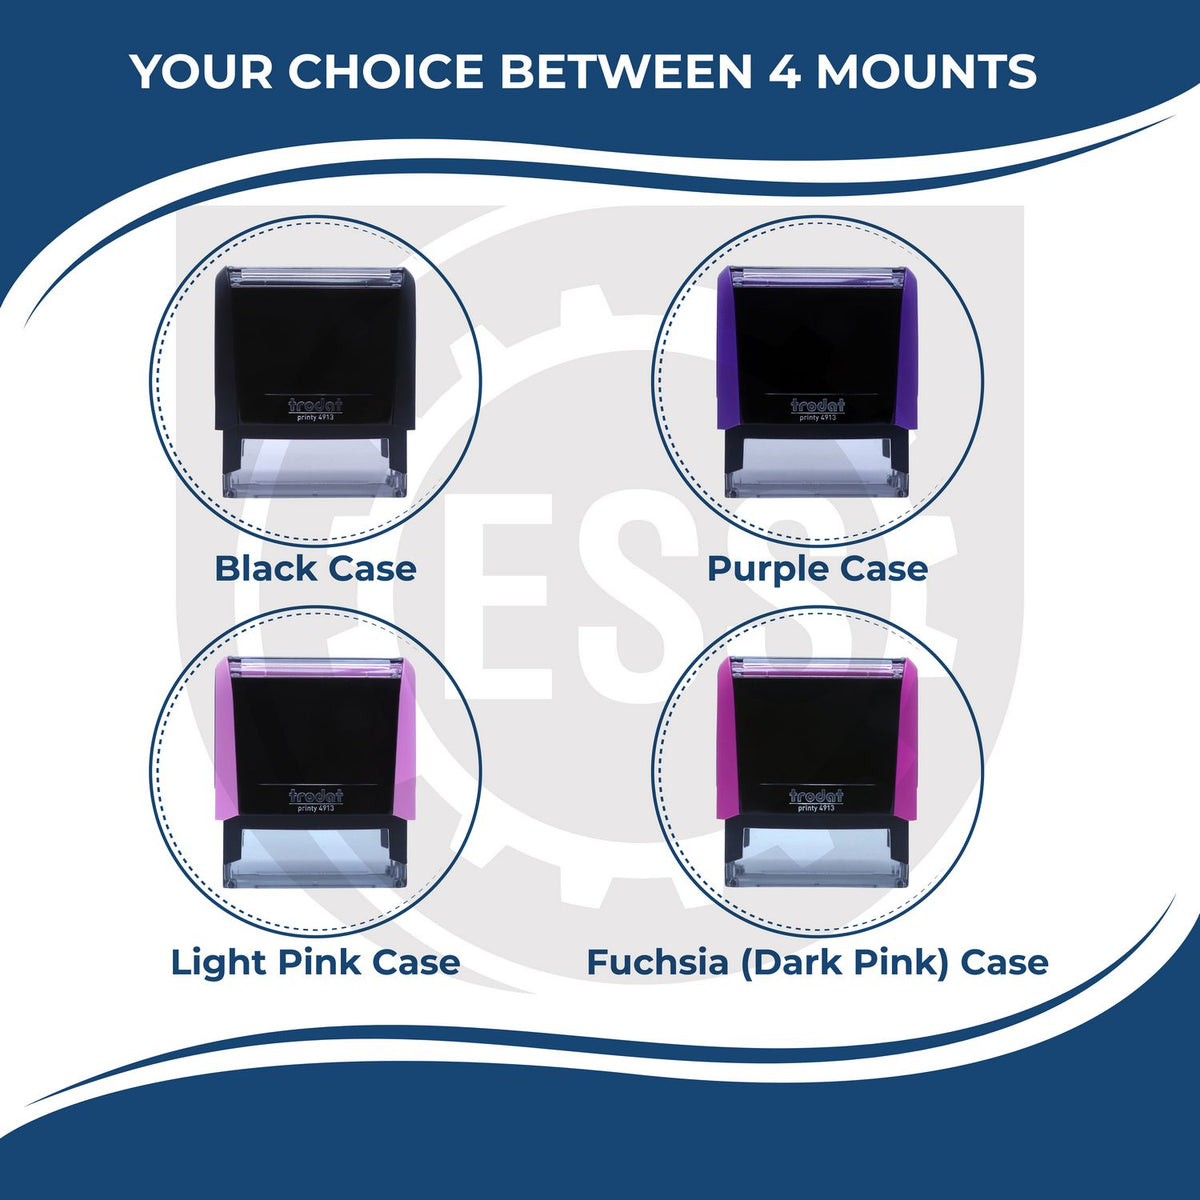 A picture of different colored mounts for the Self-Inking State Seal Alaska Notary Stamp featurning a Red, Blue or Black Mount